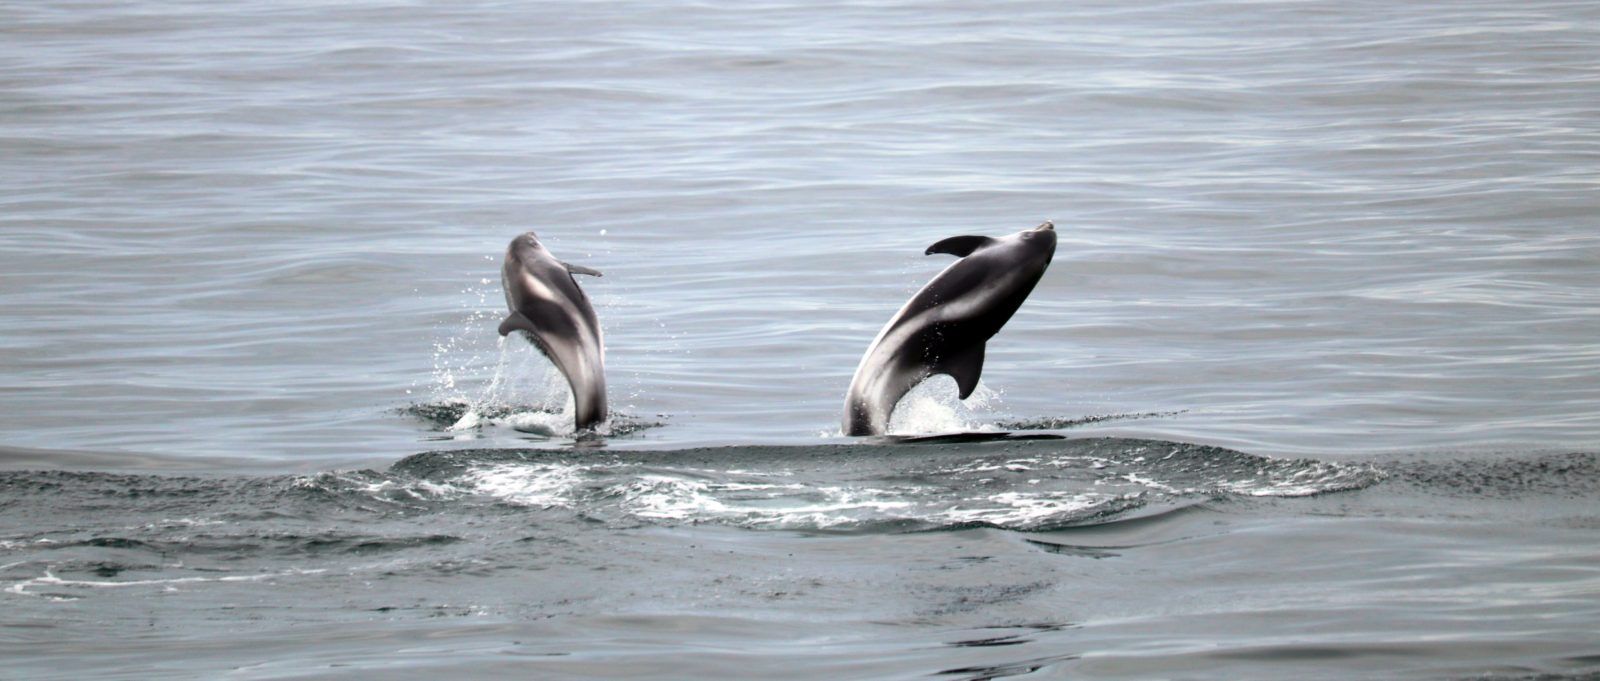 Jumping dolphins.